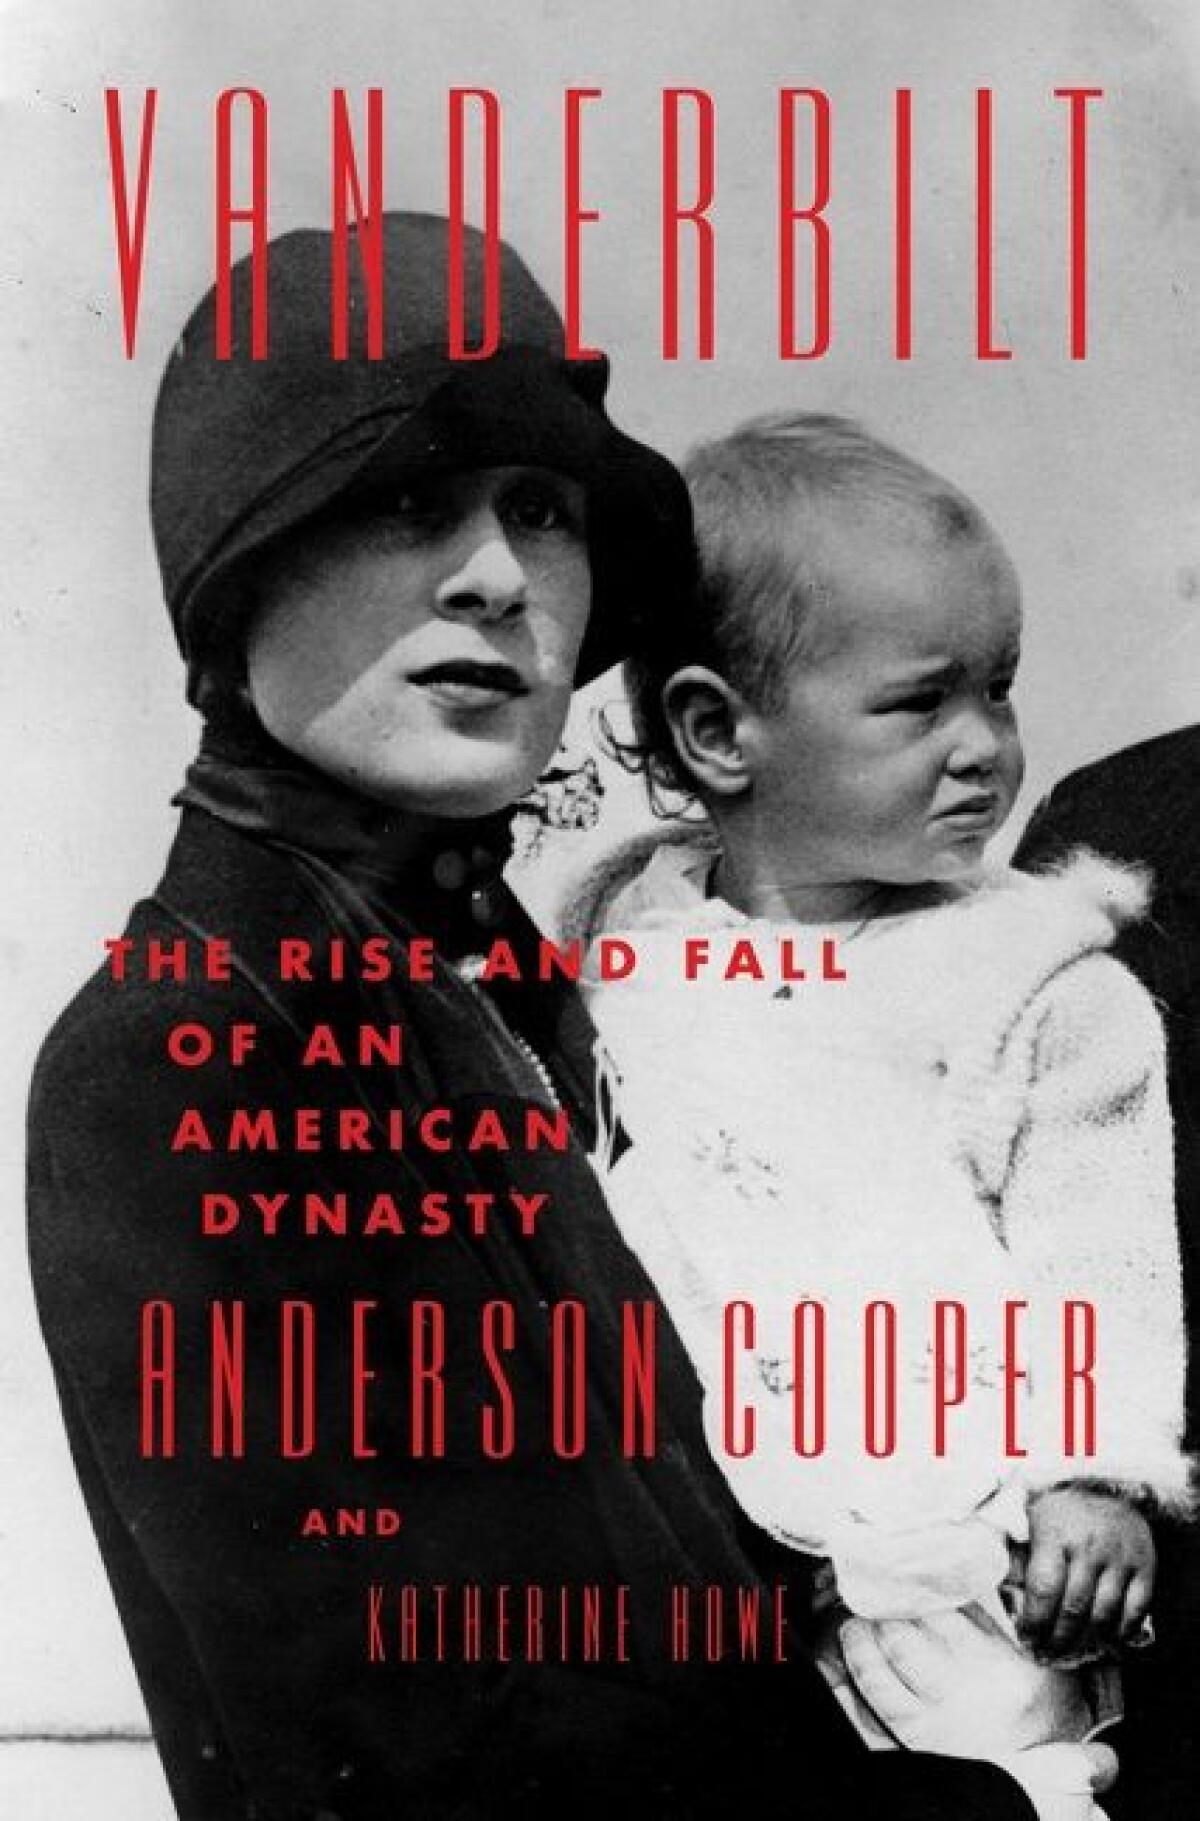 "Vanderbilt: The Rise and Fall of an American Dynasty" by Anderson Cooper and Katherine Howe.